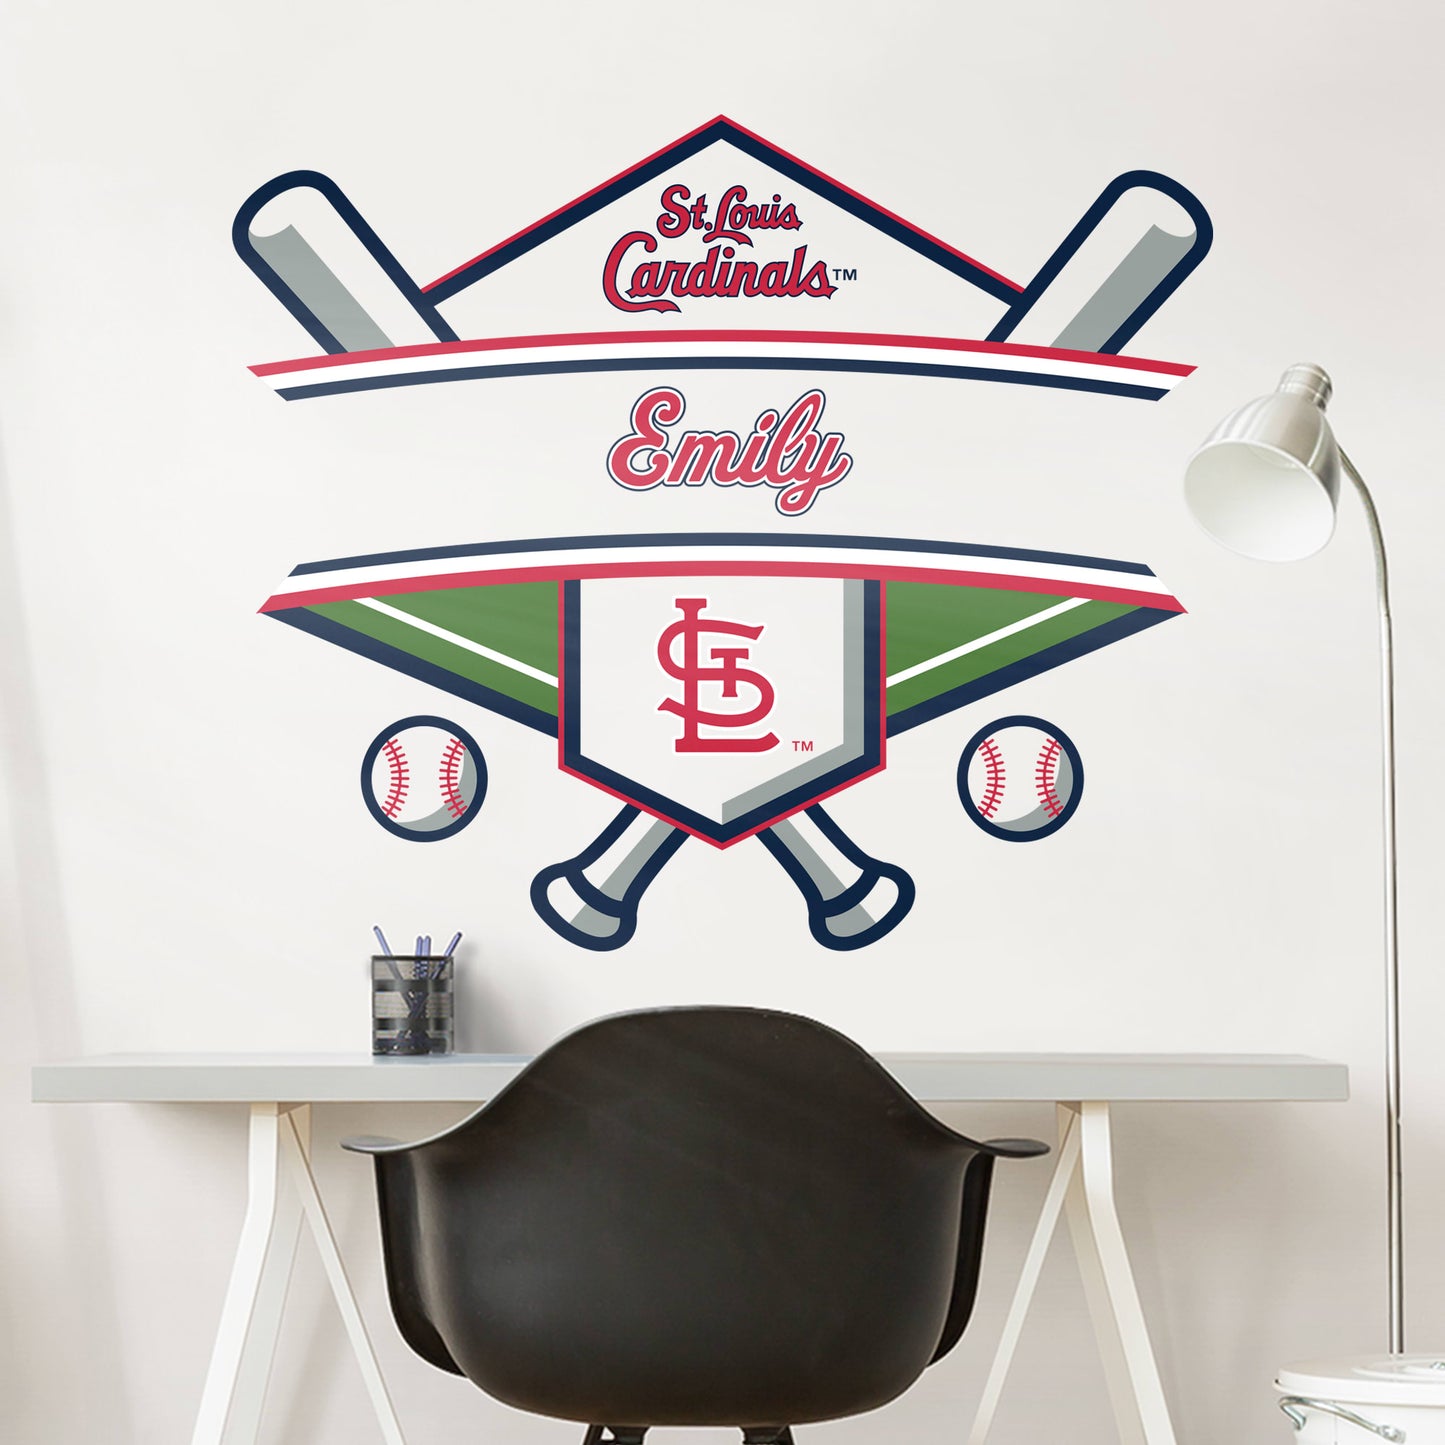 St. Louis Cardinals: Personalized Name - Officially Licensed MLB Transfer Decal